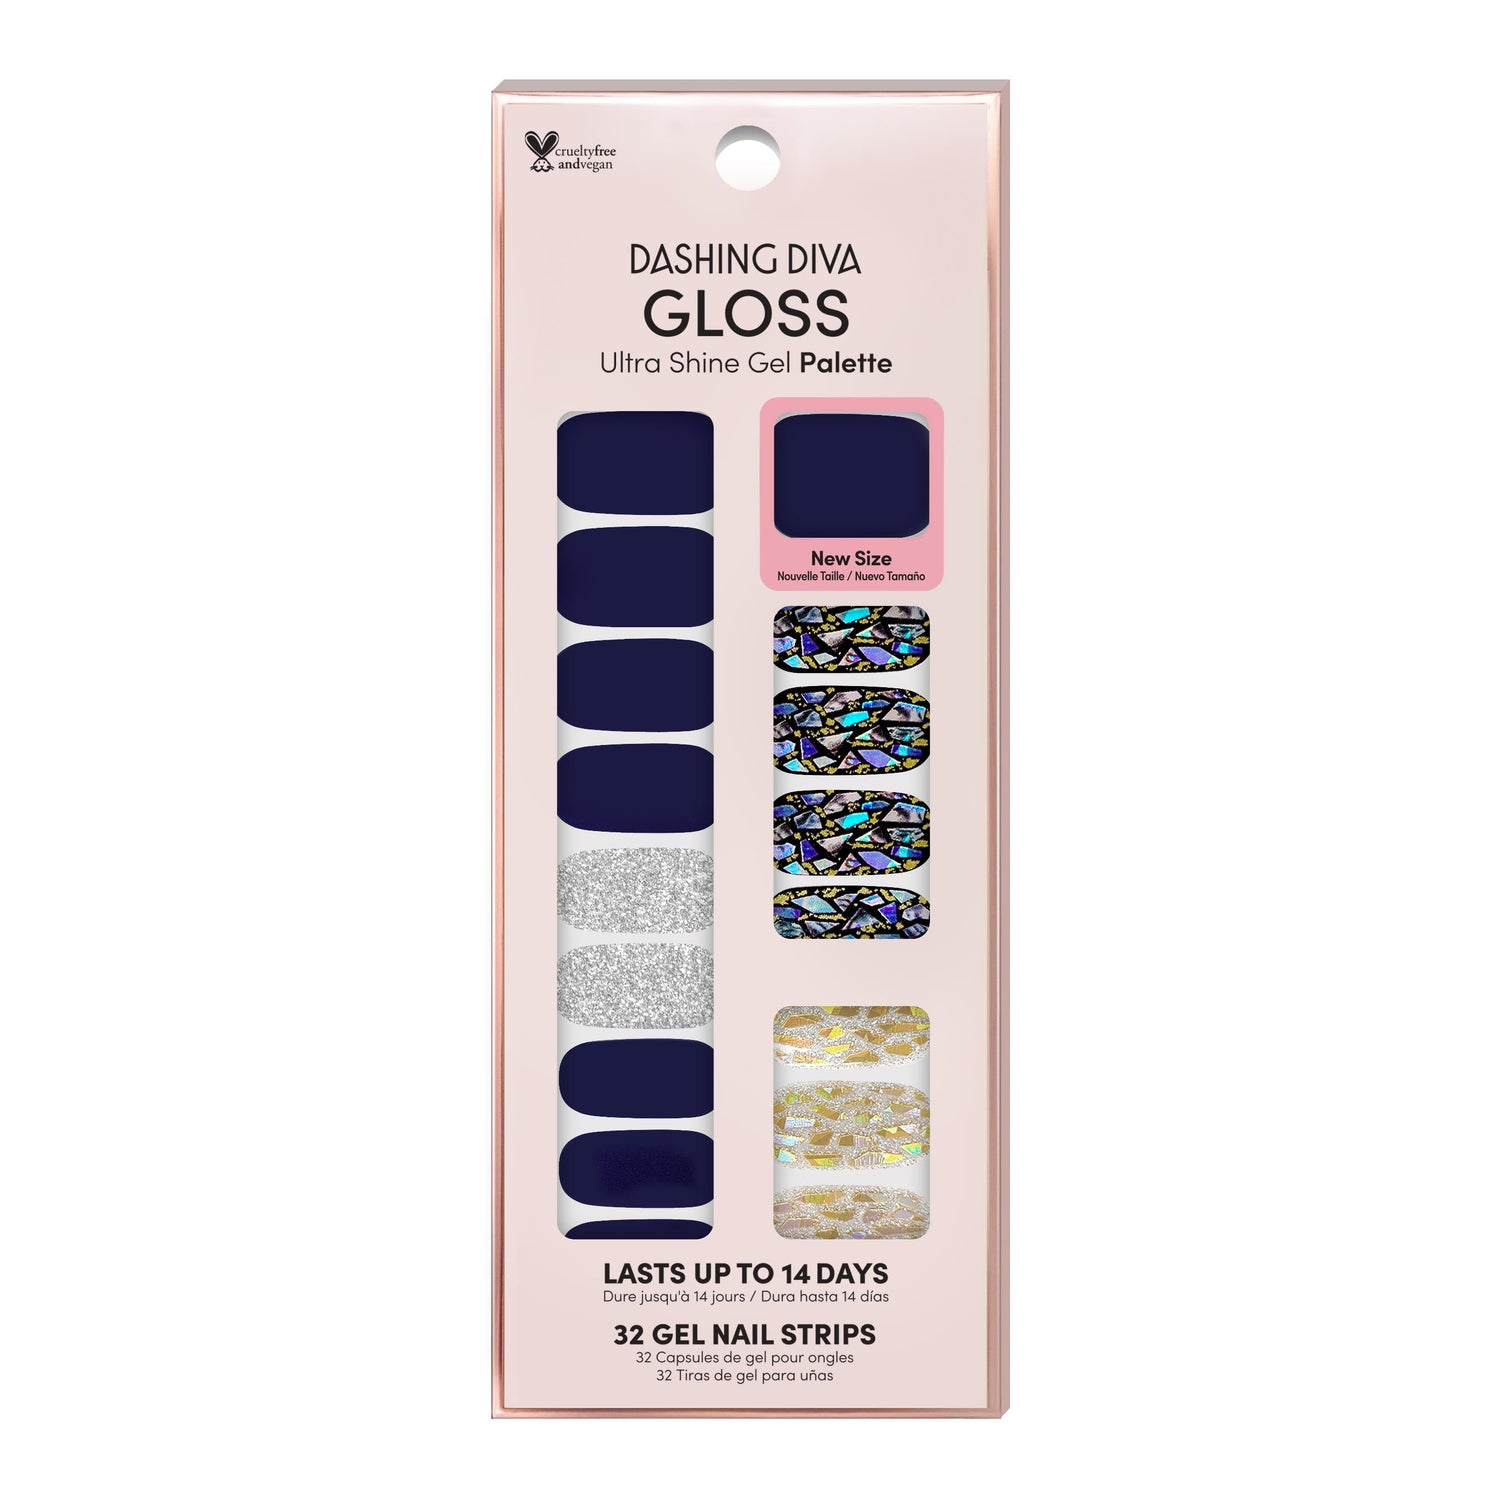 Dashing Diva GLOSS navy gel nail strips with holographic shattered glass and silver glitter accents.